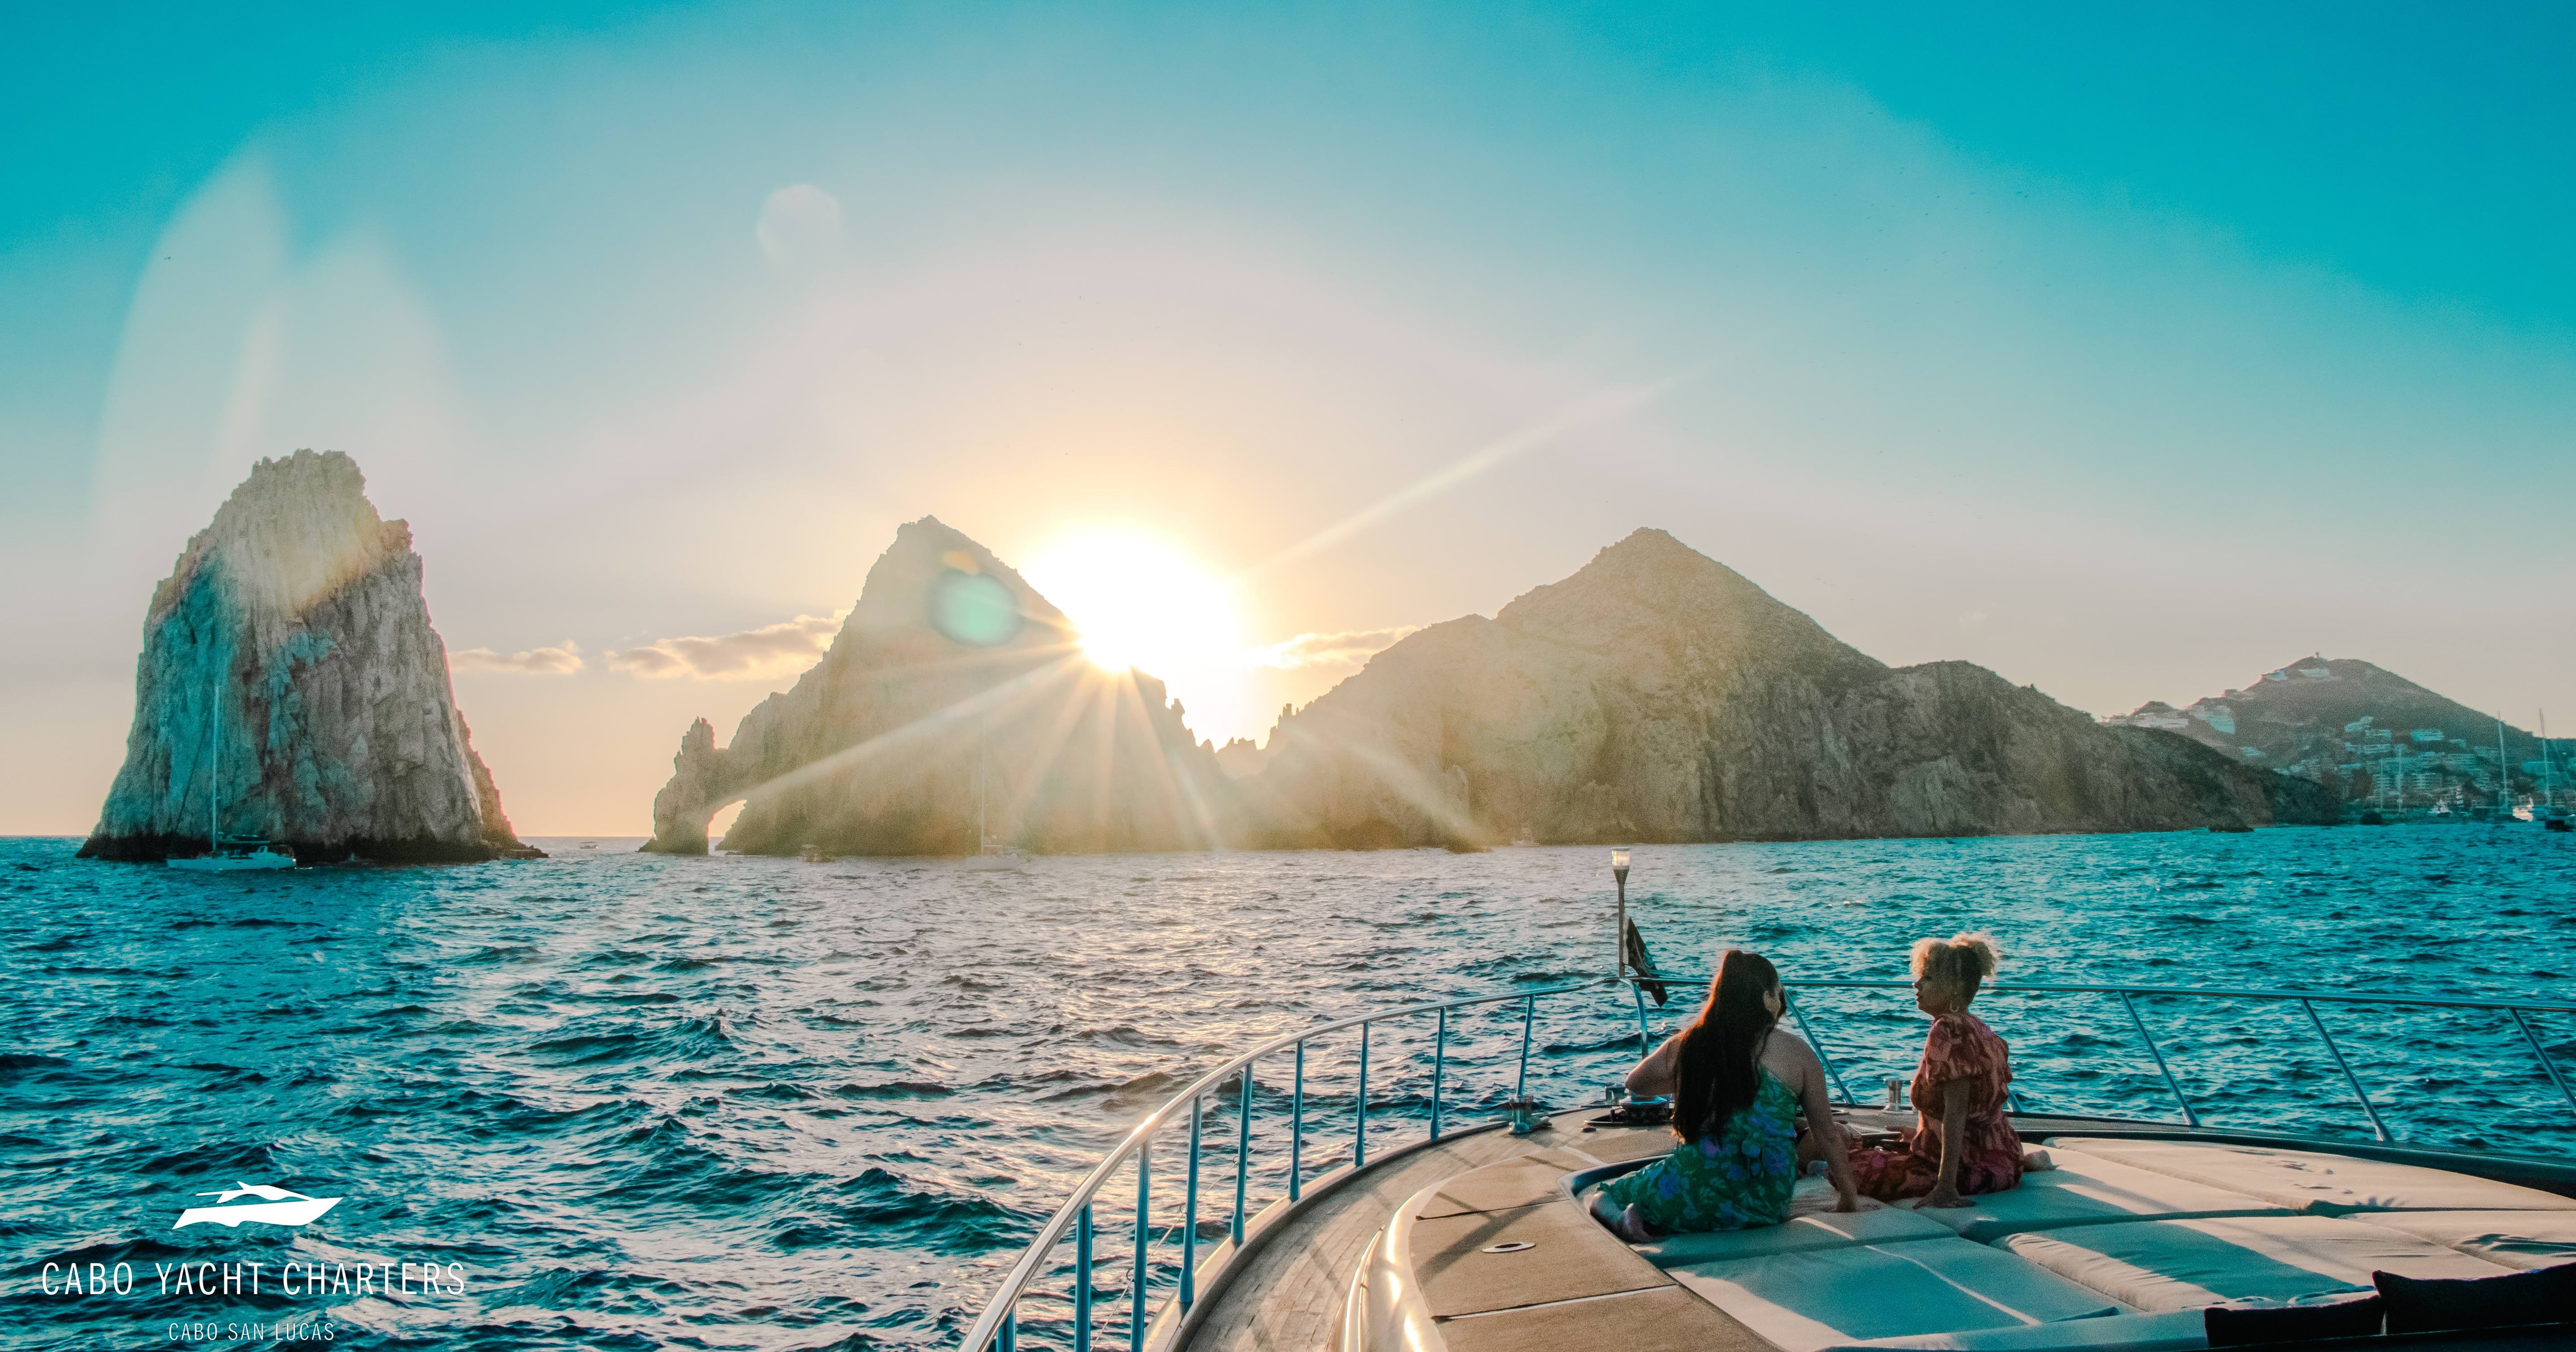 10 Items to Pack for Cabo San Lucas, According to a Travel Writer